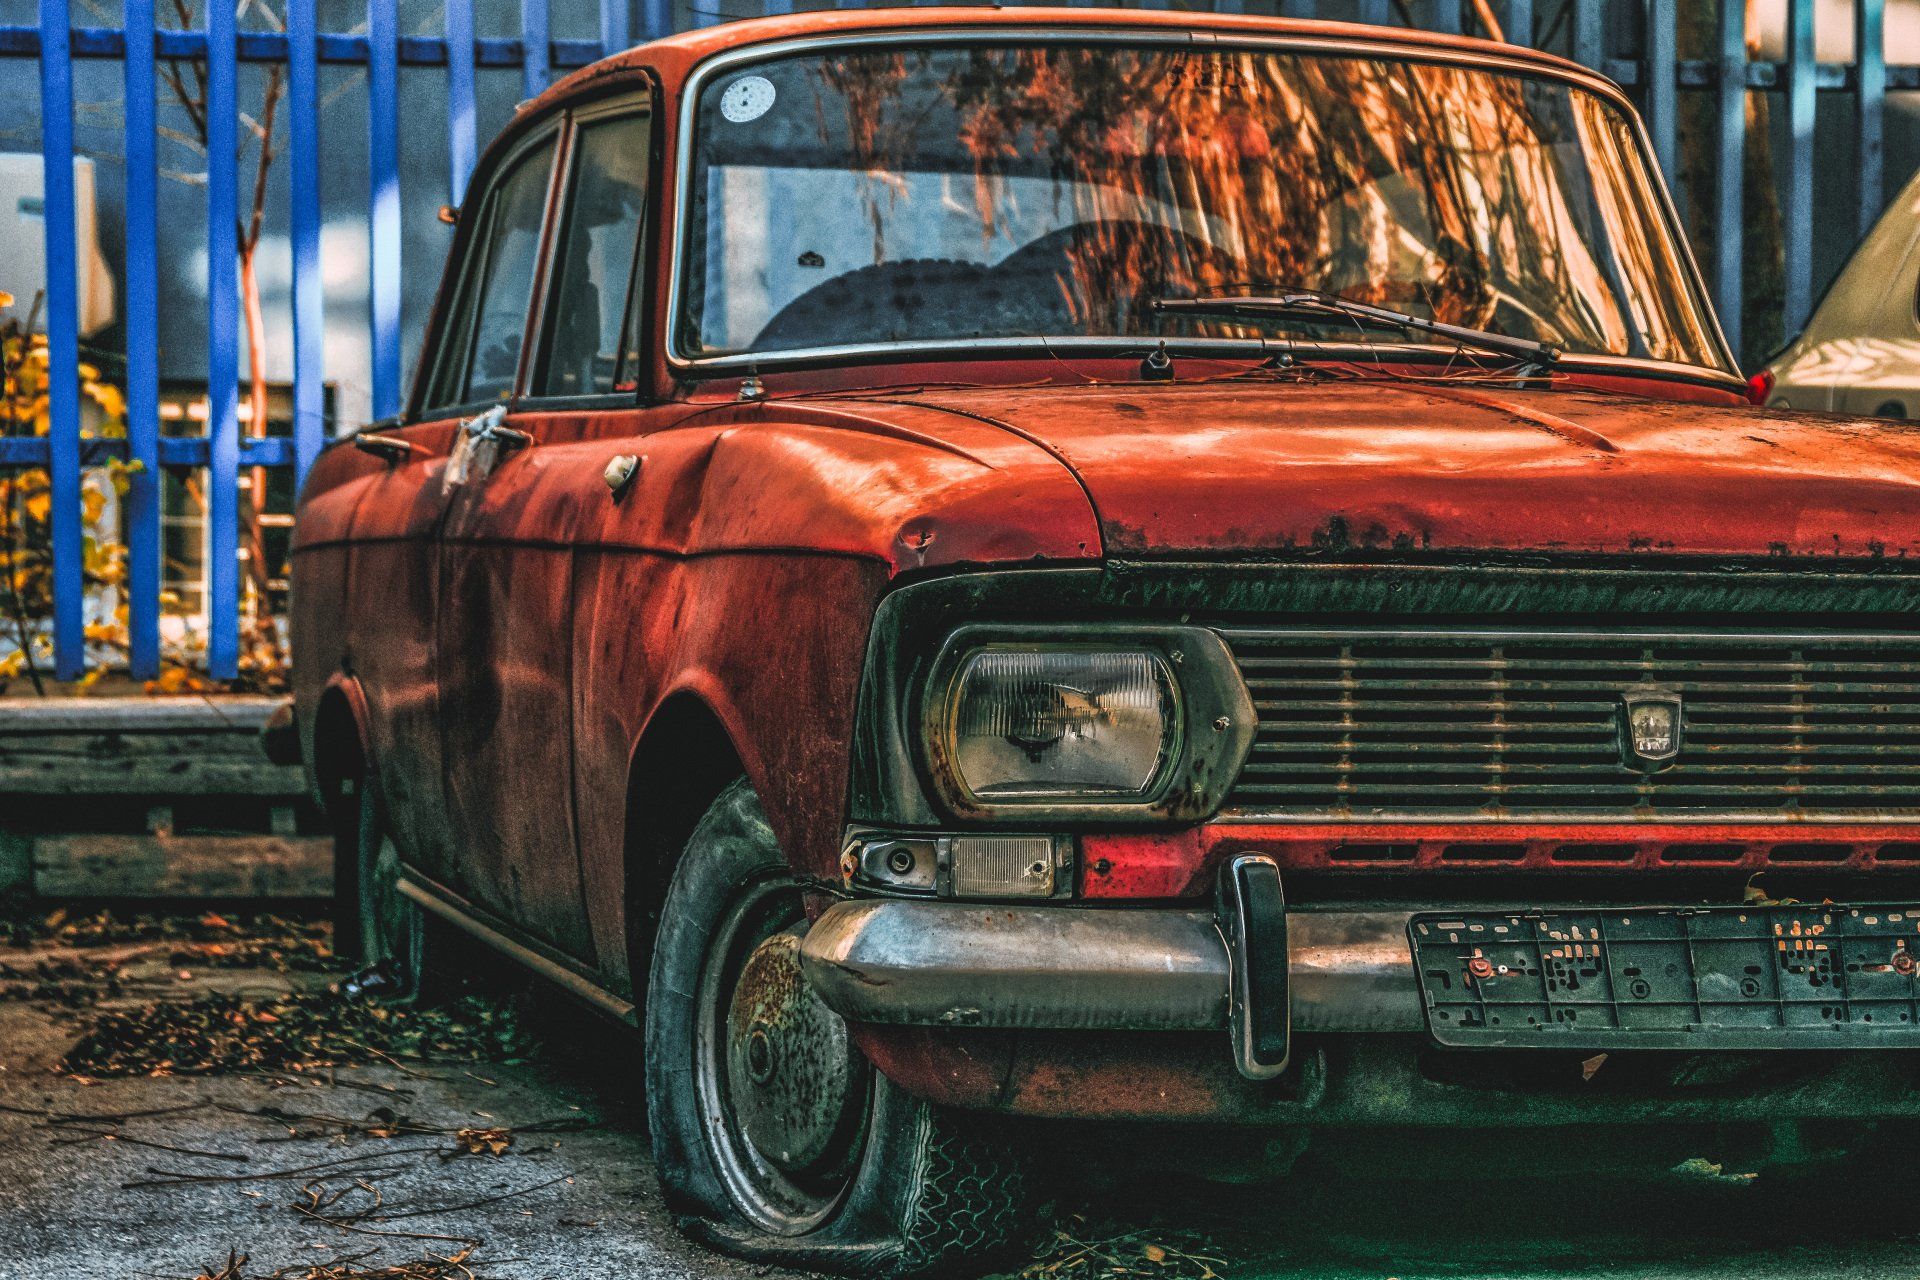 Blog | Recycling Your Junk Car | AIM Recycling